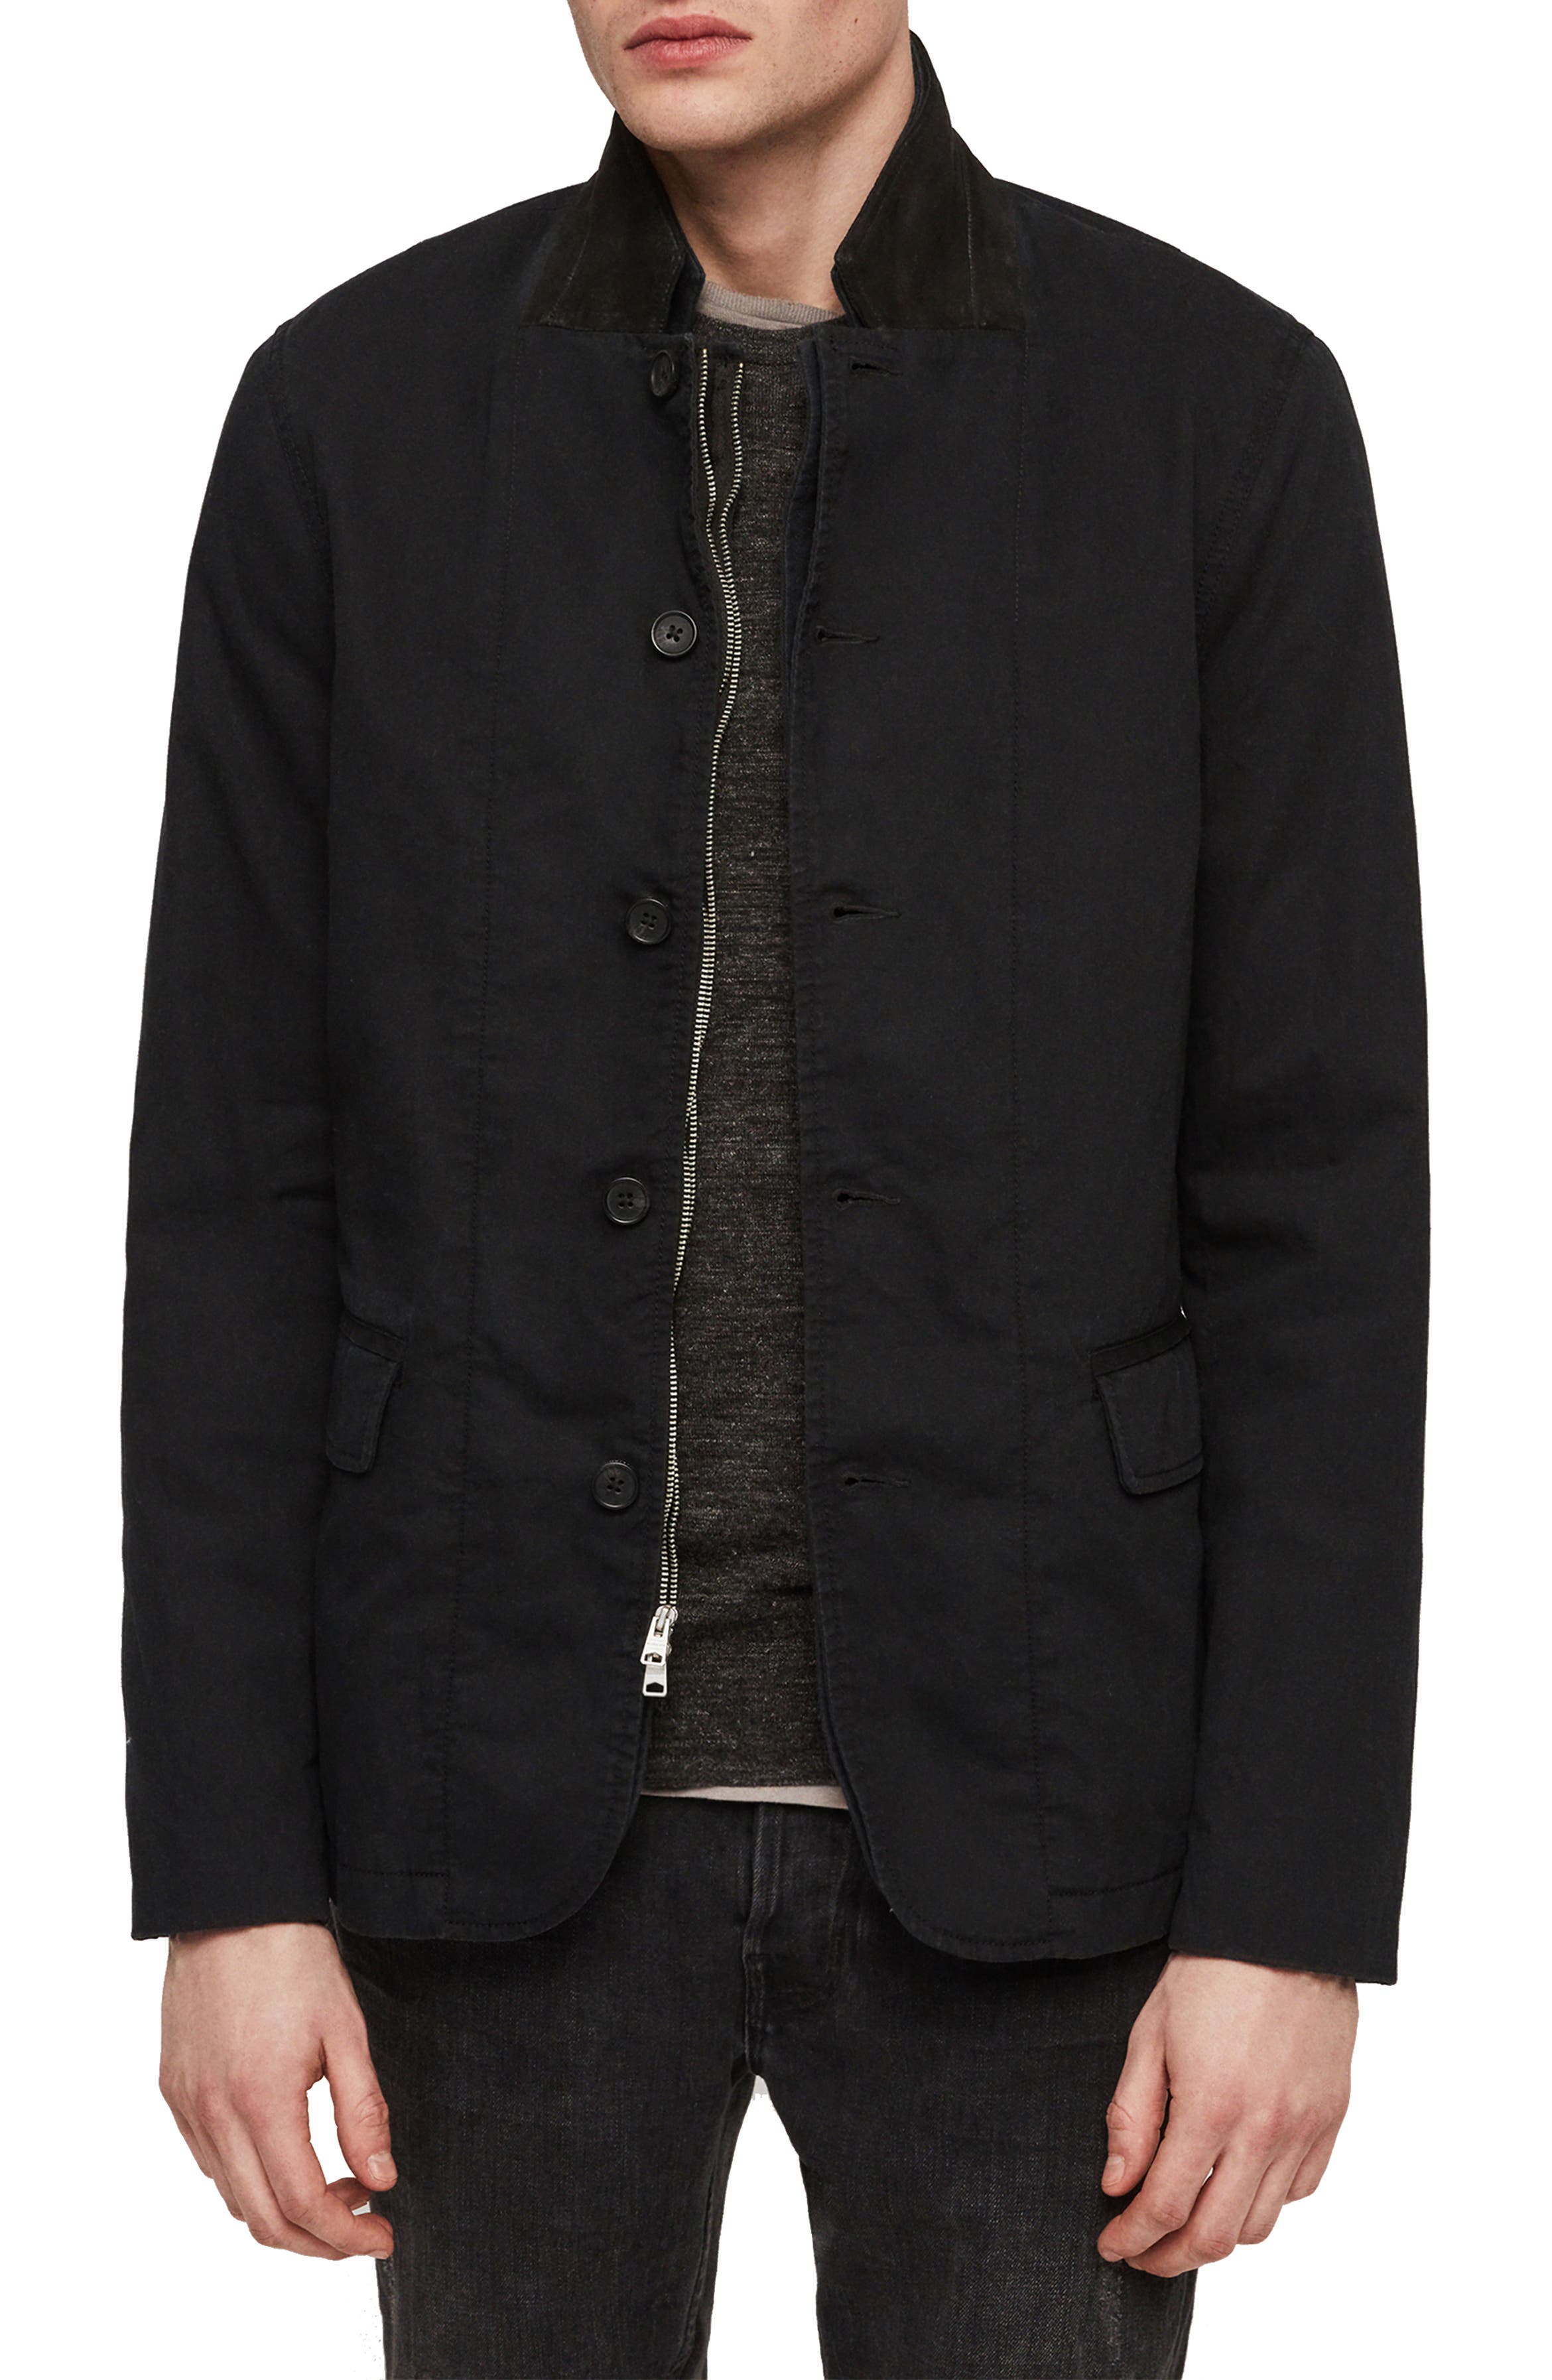 ALLSAINTS Clymont Slim Fit Jacket with Suede Collar | Nordstrom